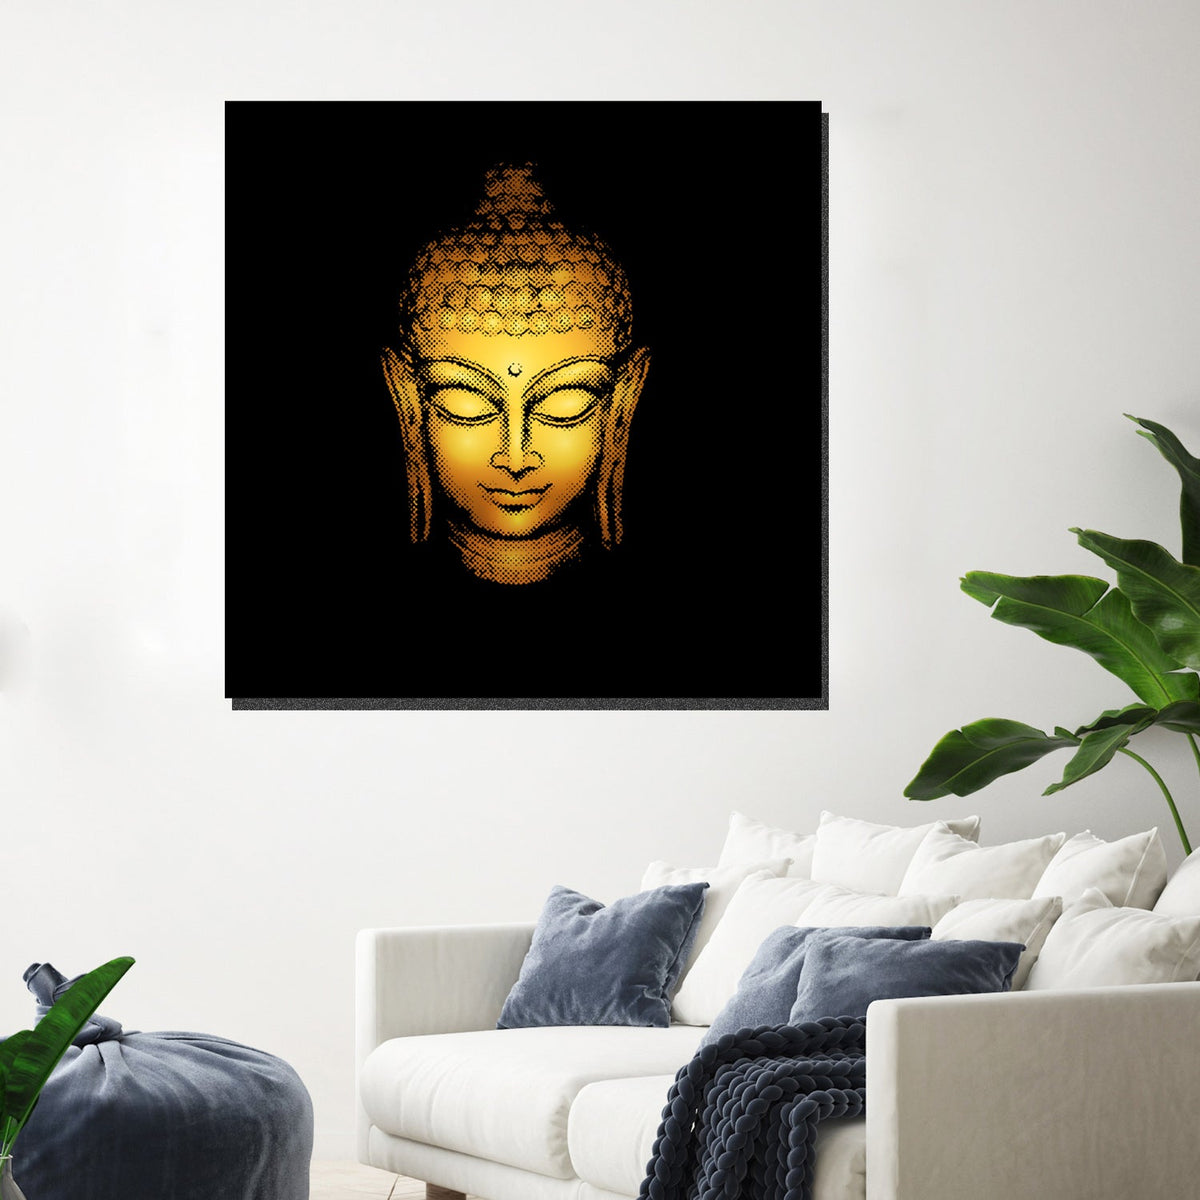 https://cdn.shopify.com/s/files/1/0387/9986/8044/products/BuddhaInGoldSketchCanvasPrintStretched-4.jpg